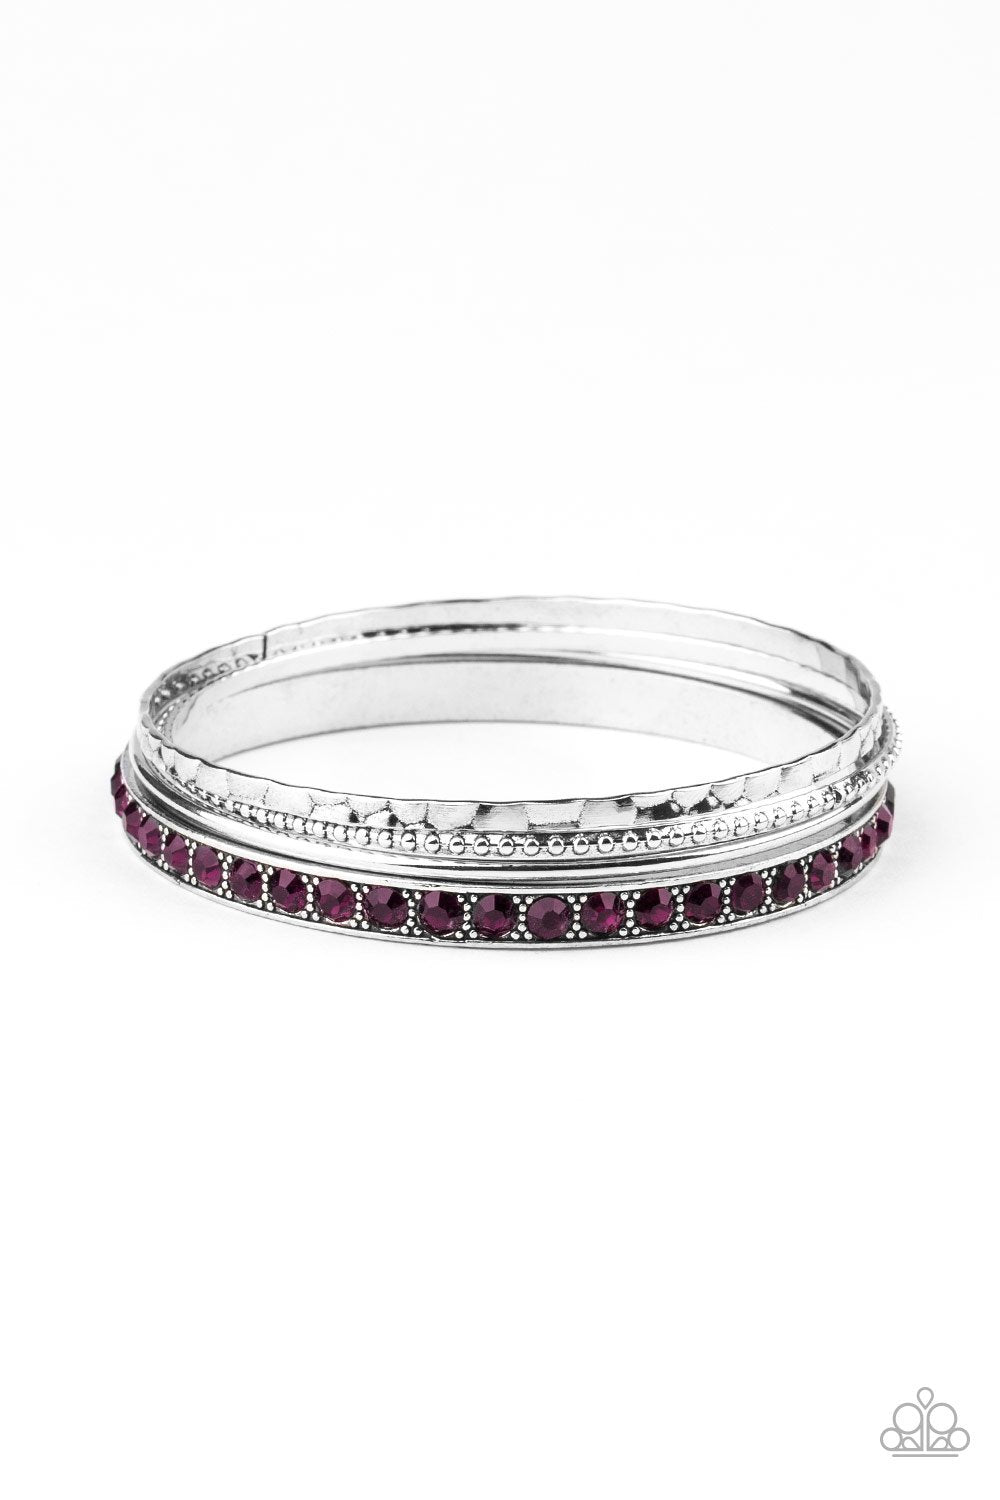 Fearless Shimmer Silver and Purple Rhinestone Bangle Bracelet Set - Paparazzi Accessories-CarasShop.com - $5 Jewelry by Cara Jewels